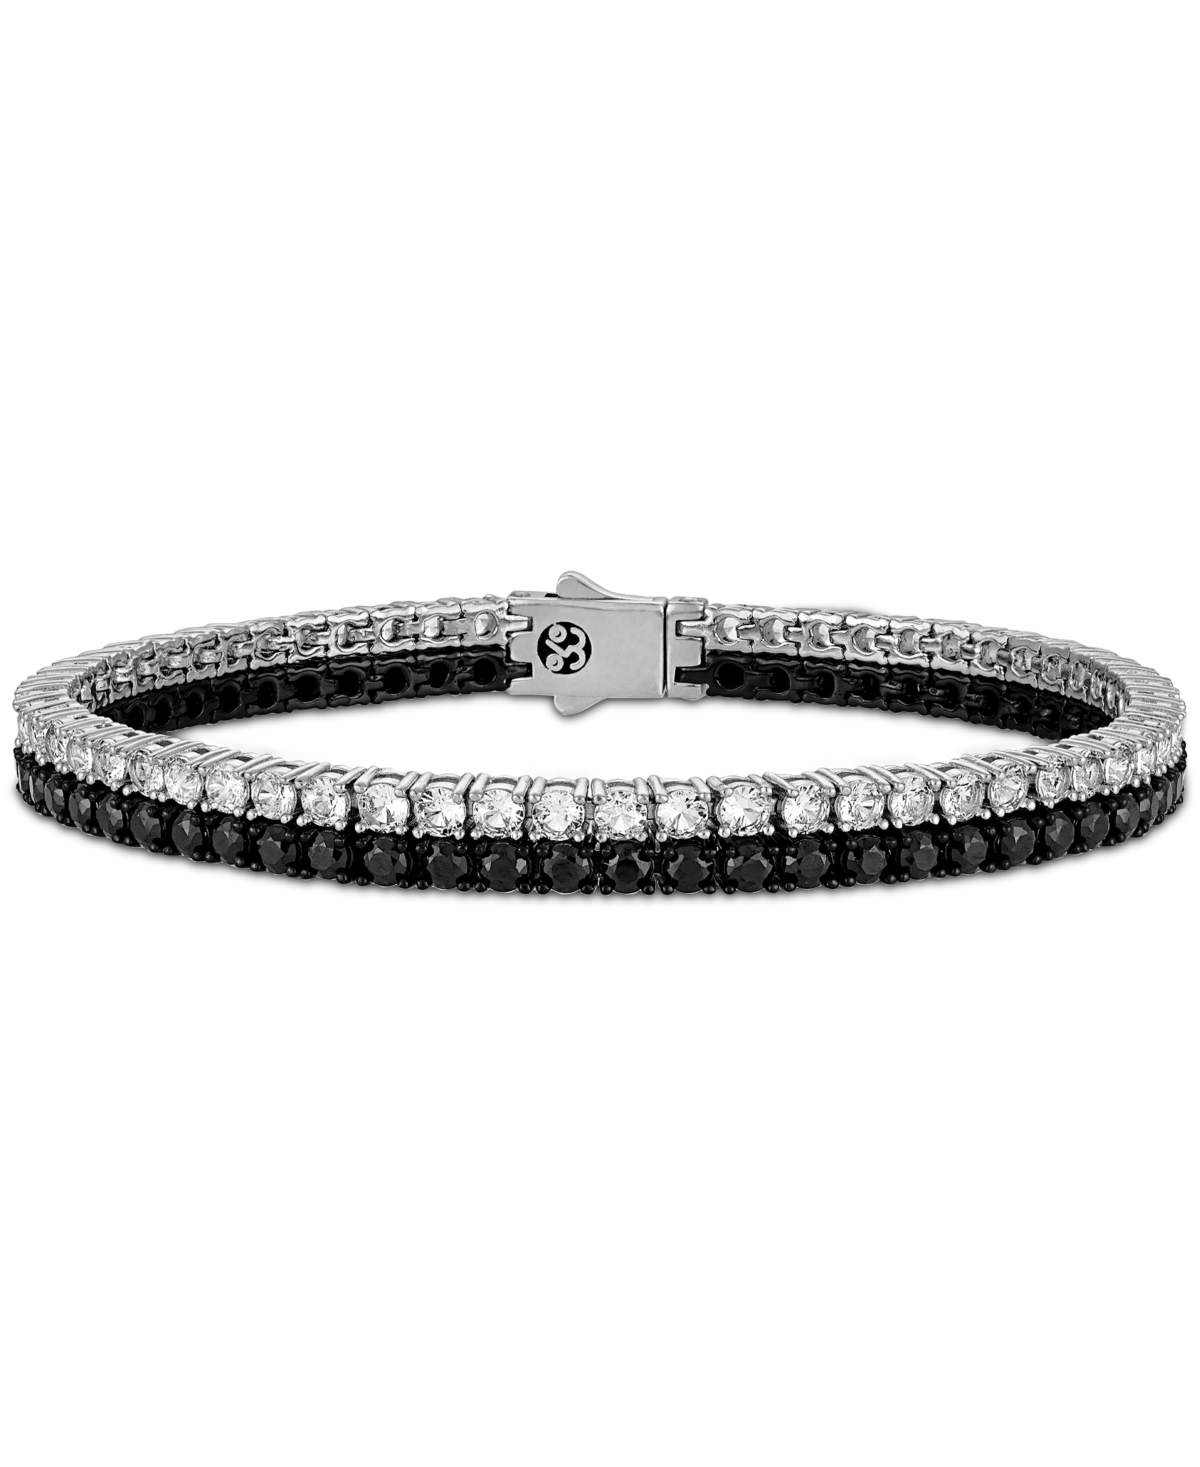 Black & White Cubic Zirconia Double Strand Tennis Bracelet in Sterling Silver, Created for Macy's - Black/White